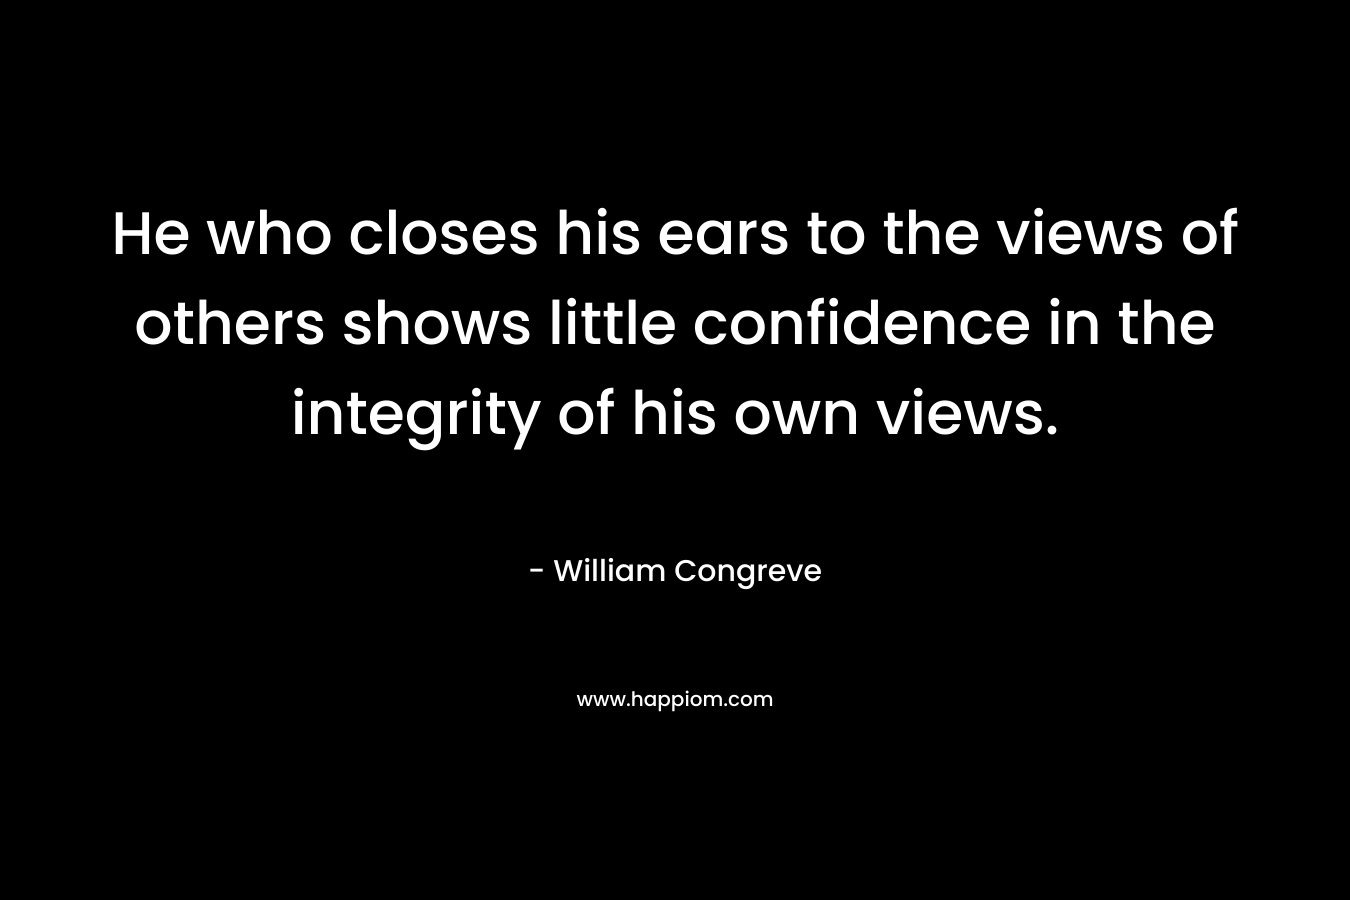 He who closes his ears to the views of others shows little confidence in the integrity of his own views. – William Congreve